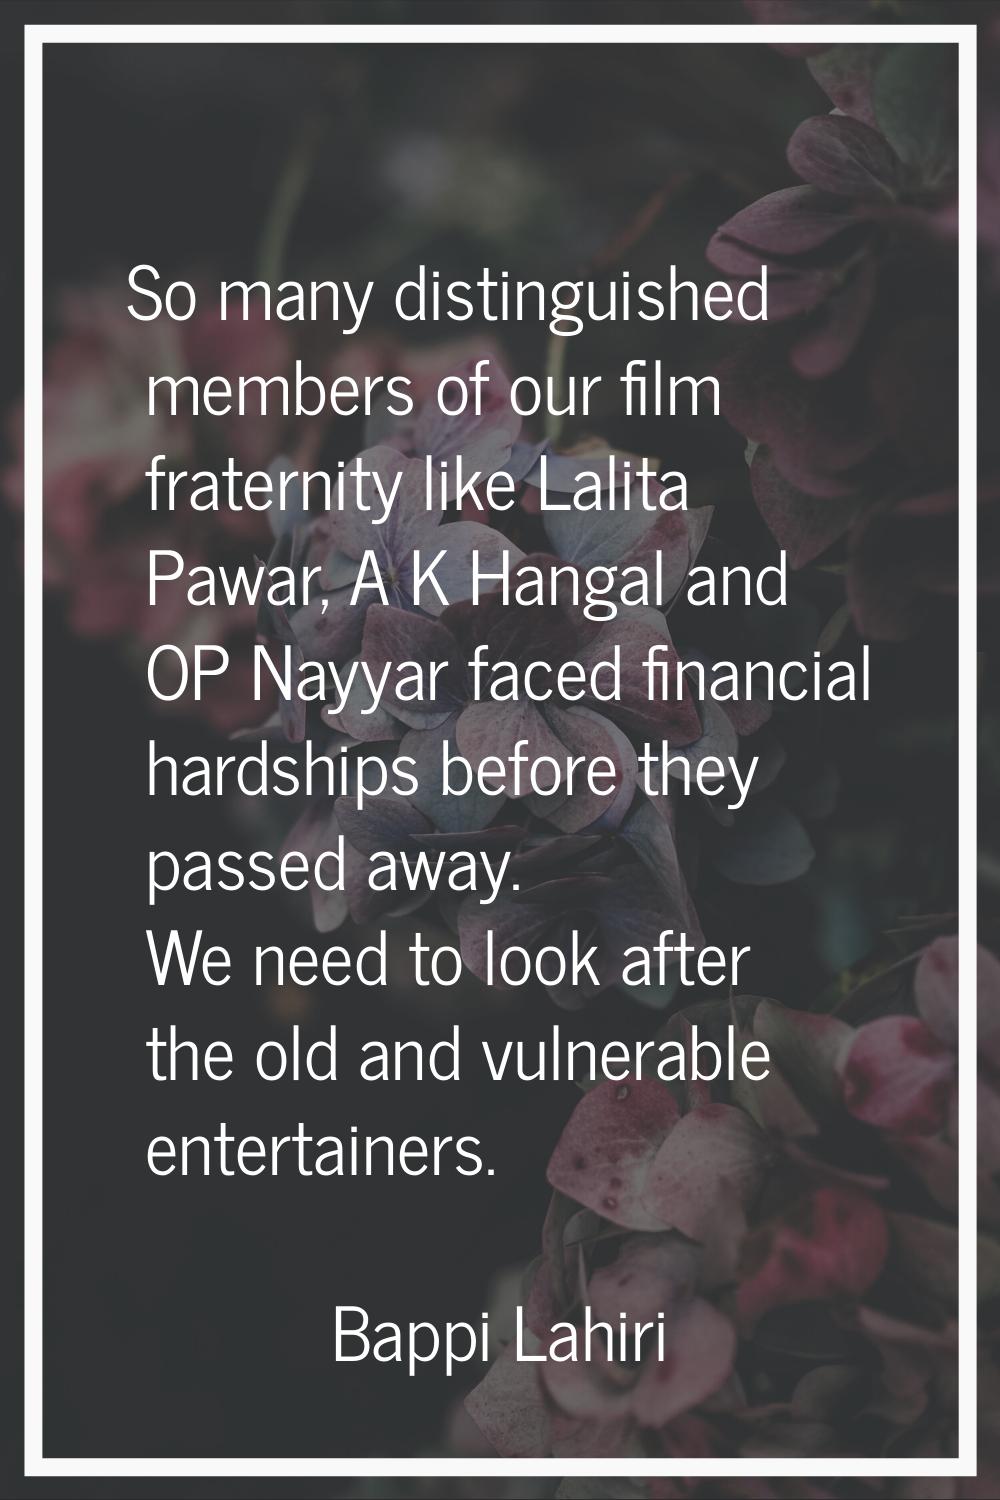 So many distinguished members of our film fraternity like Lalita Pawar, A K Hangal and OP Nayyar fa